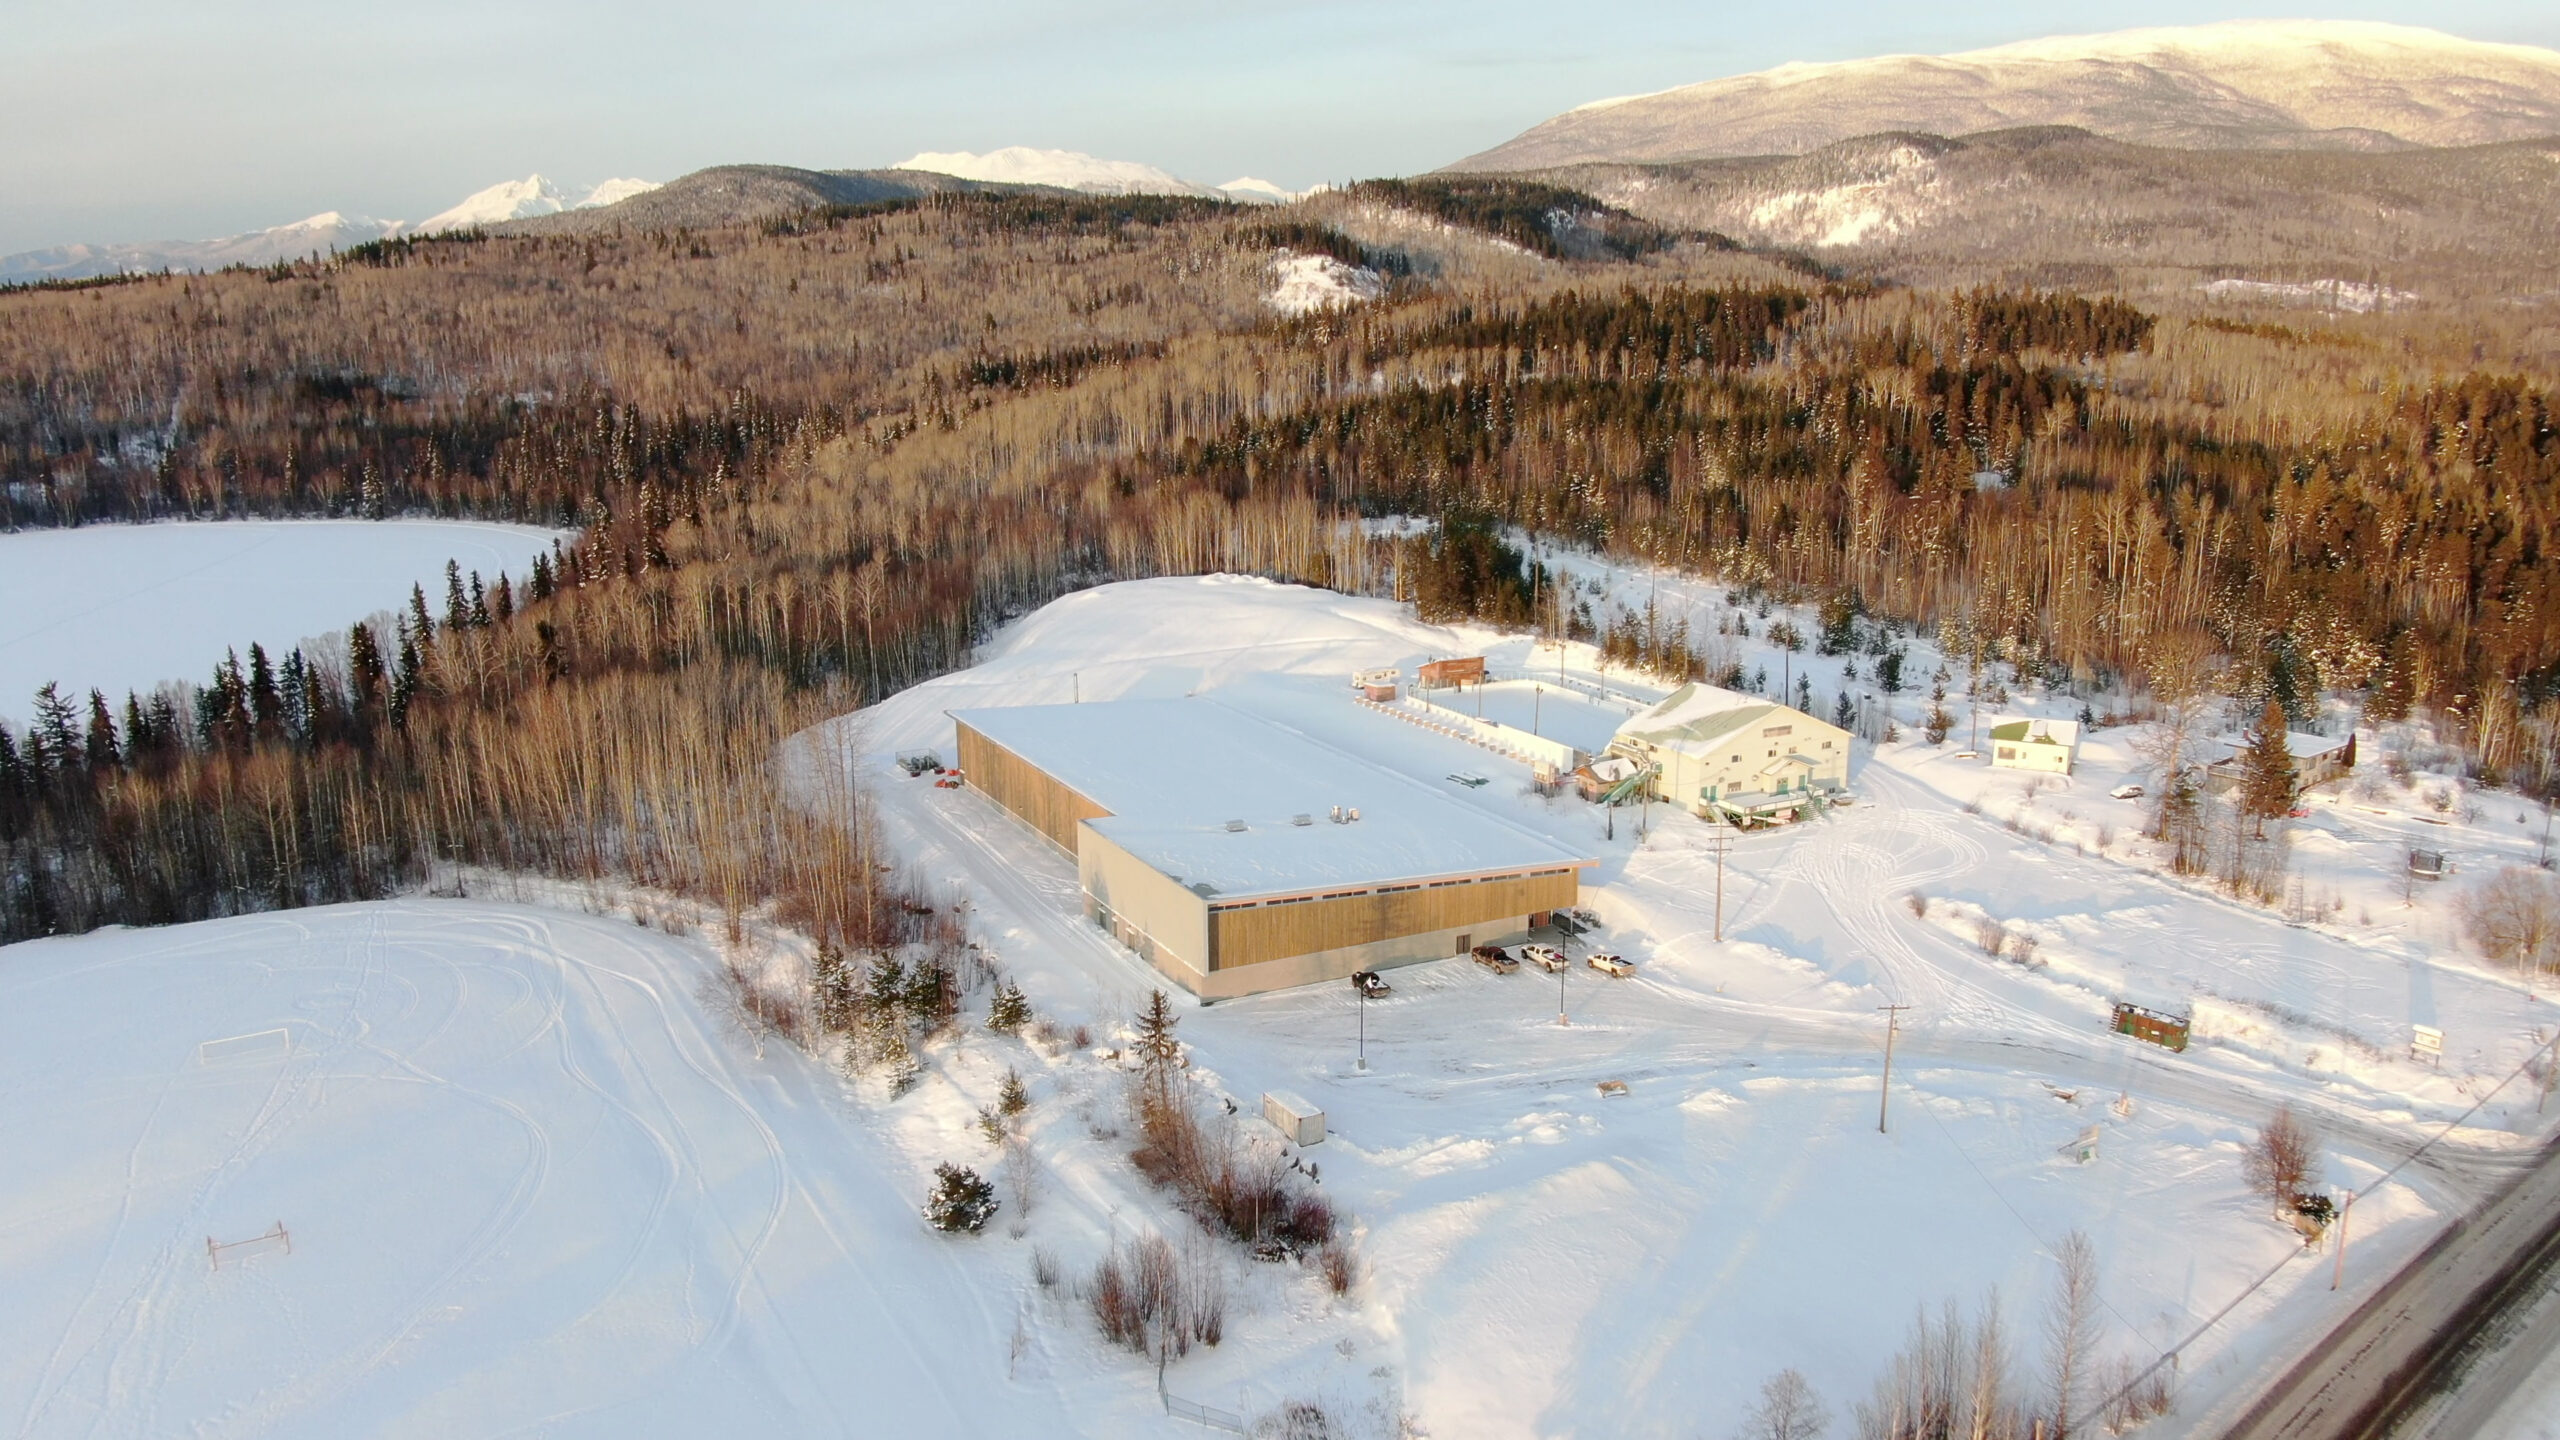 A semi-aerial view showcases the Upper Skeena Recreation Center y blending into the snow-capped mountain landscape